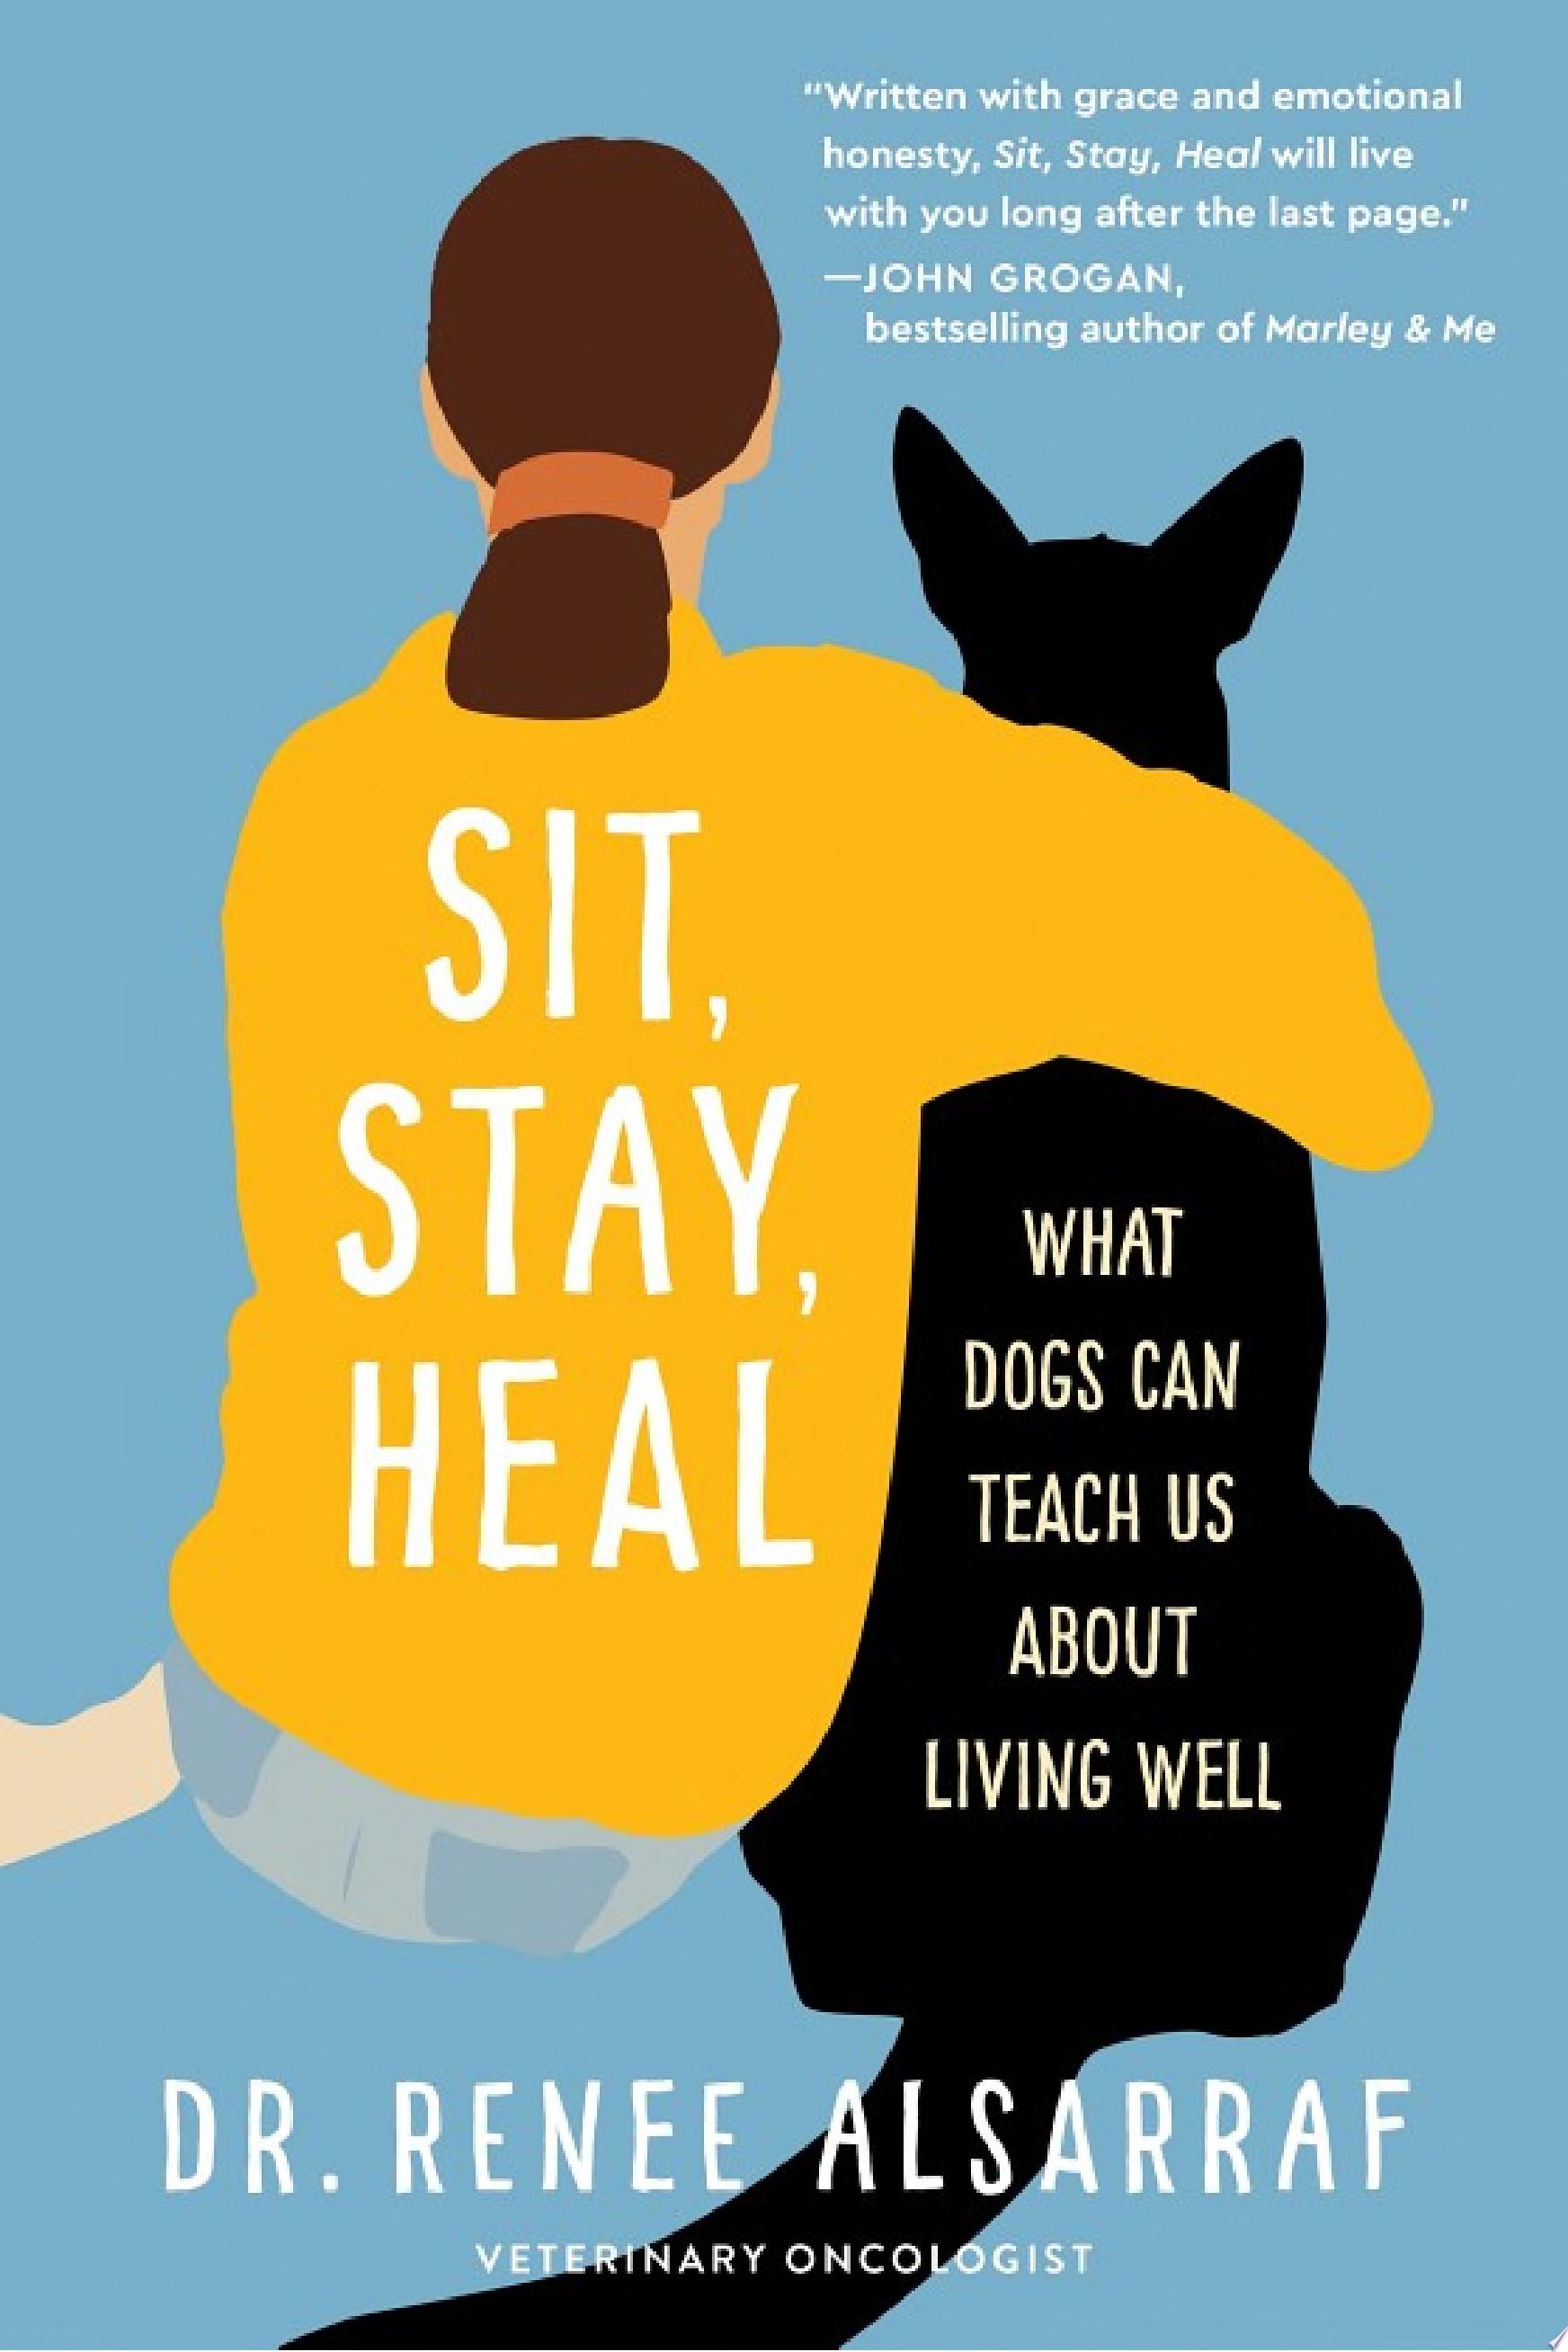 Image for "Sit, Stay, Heal"